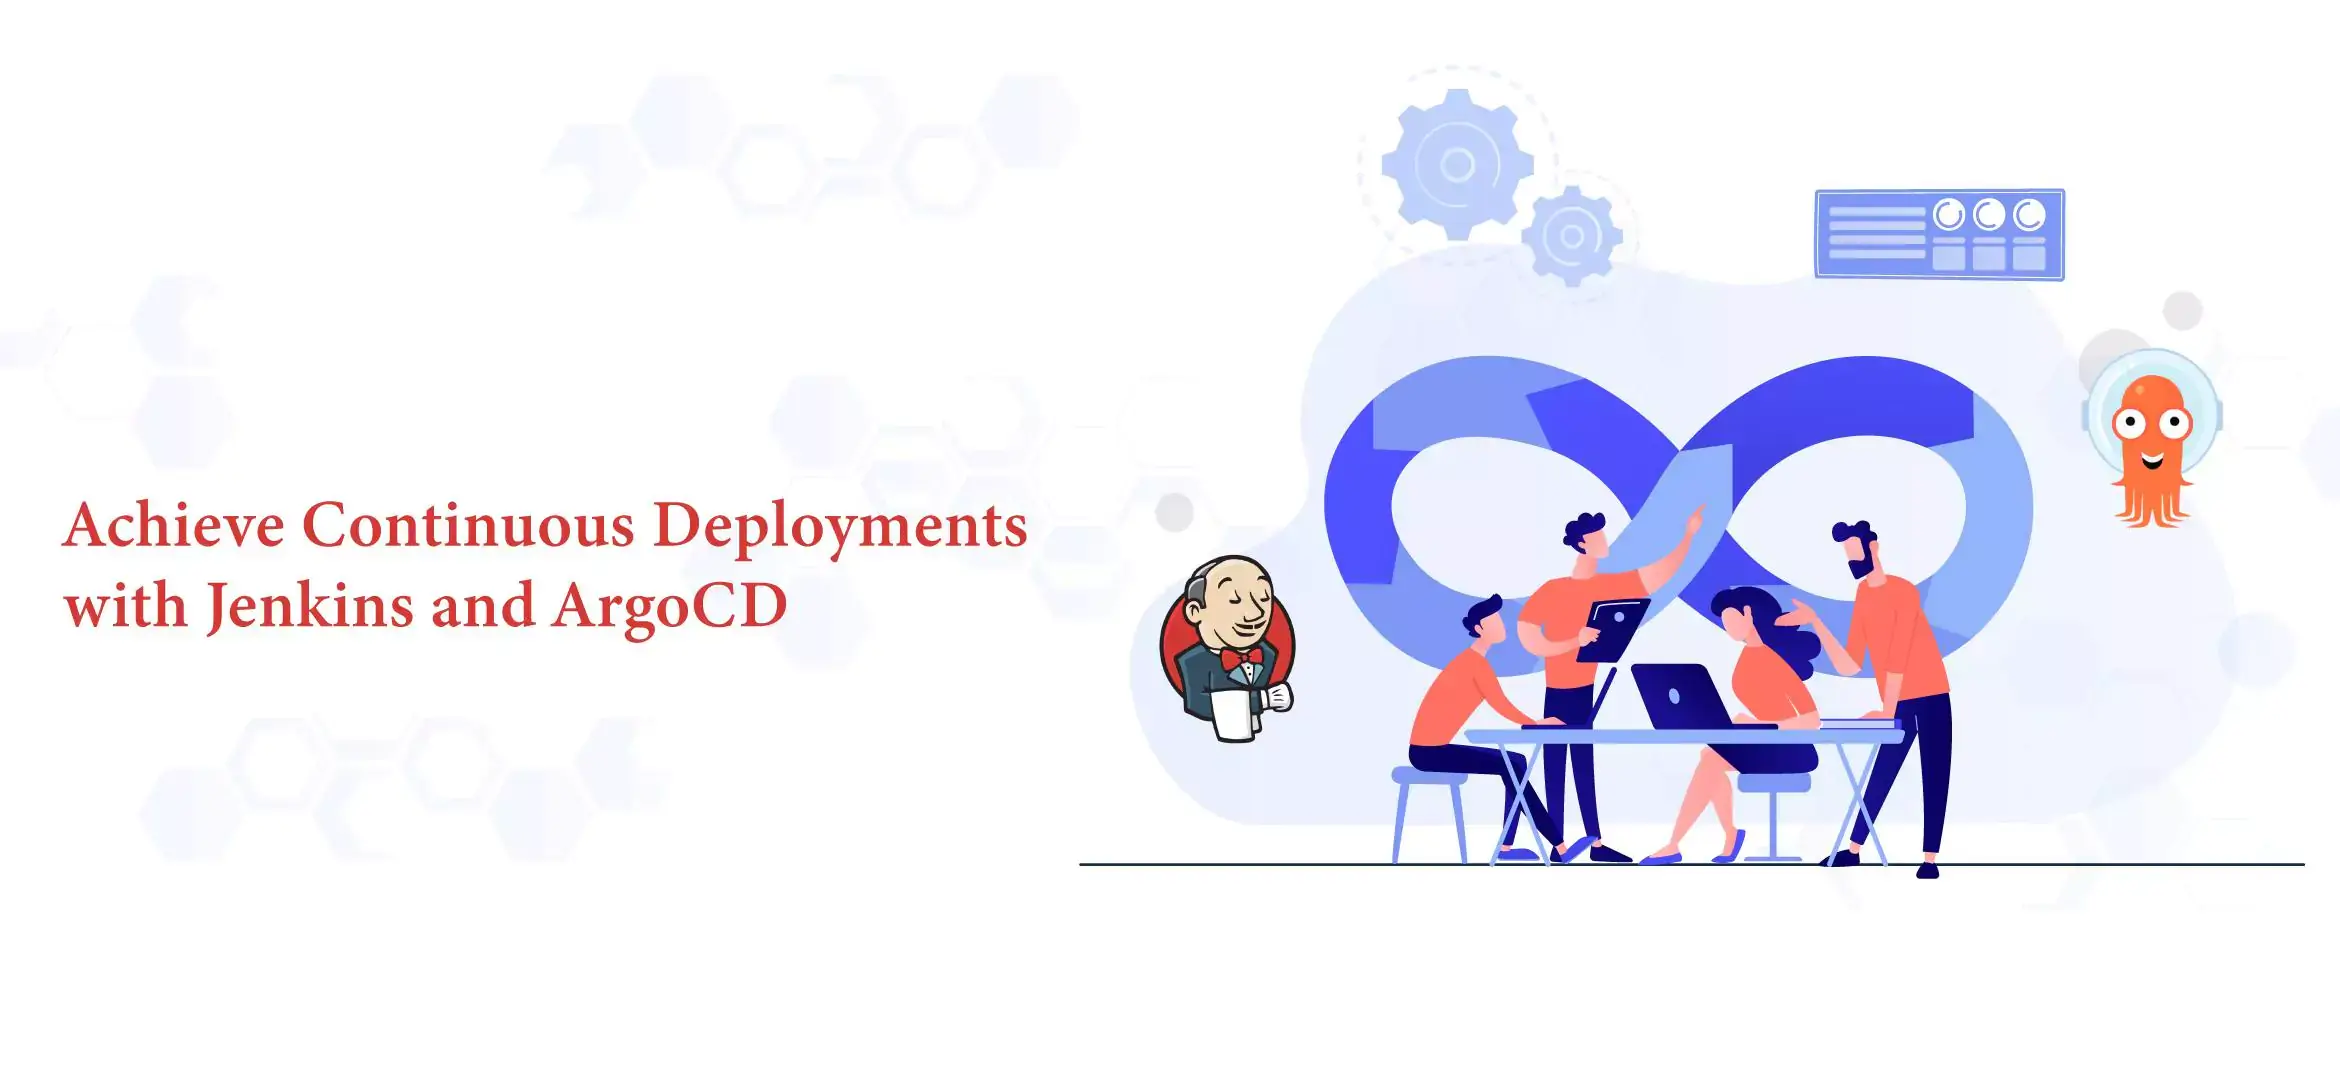 Achieve Continuous Deployments with Jenkins and ArgoCD